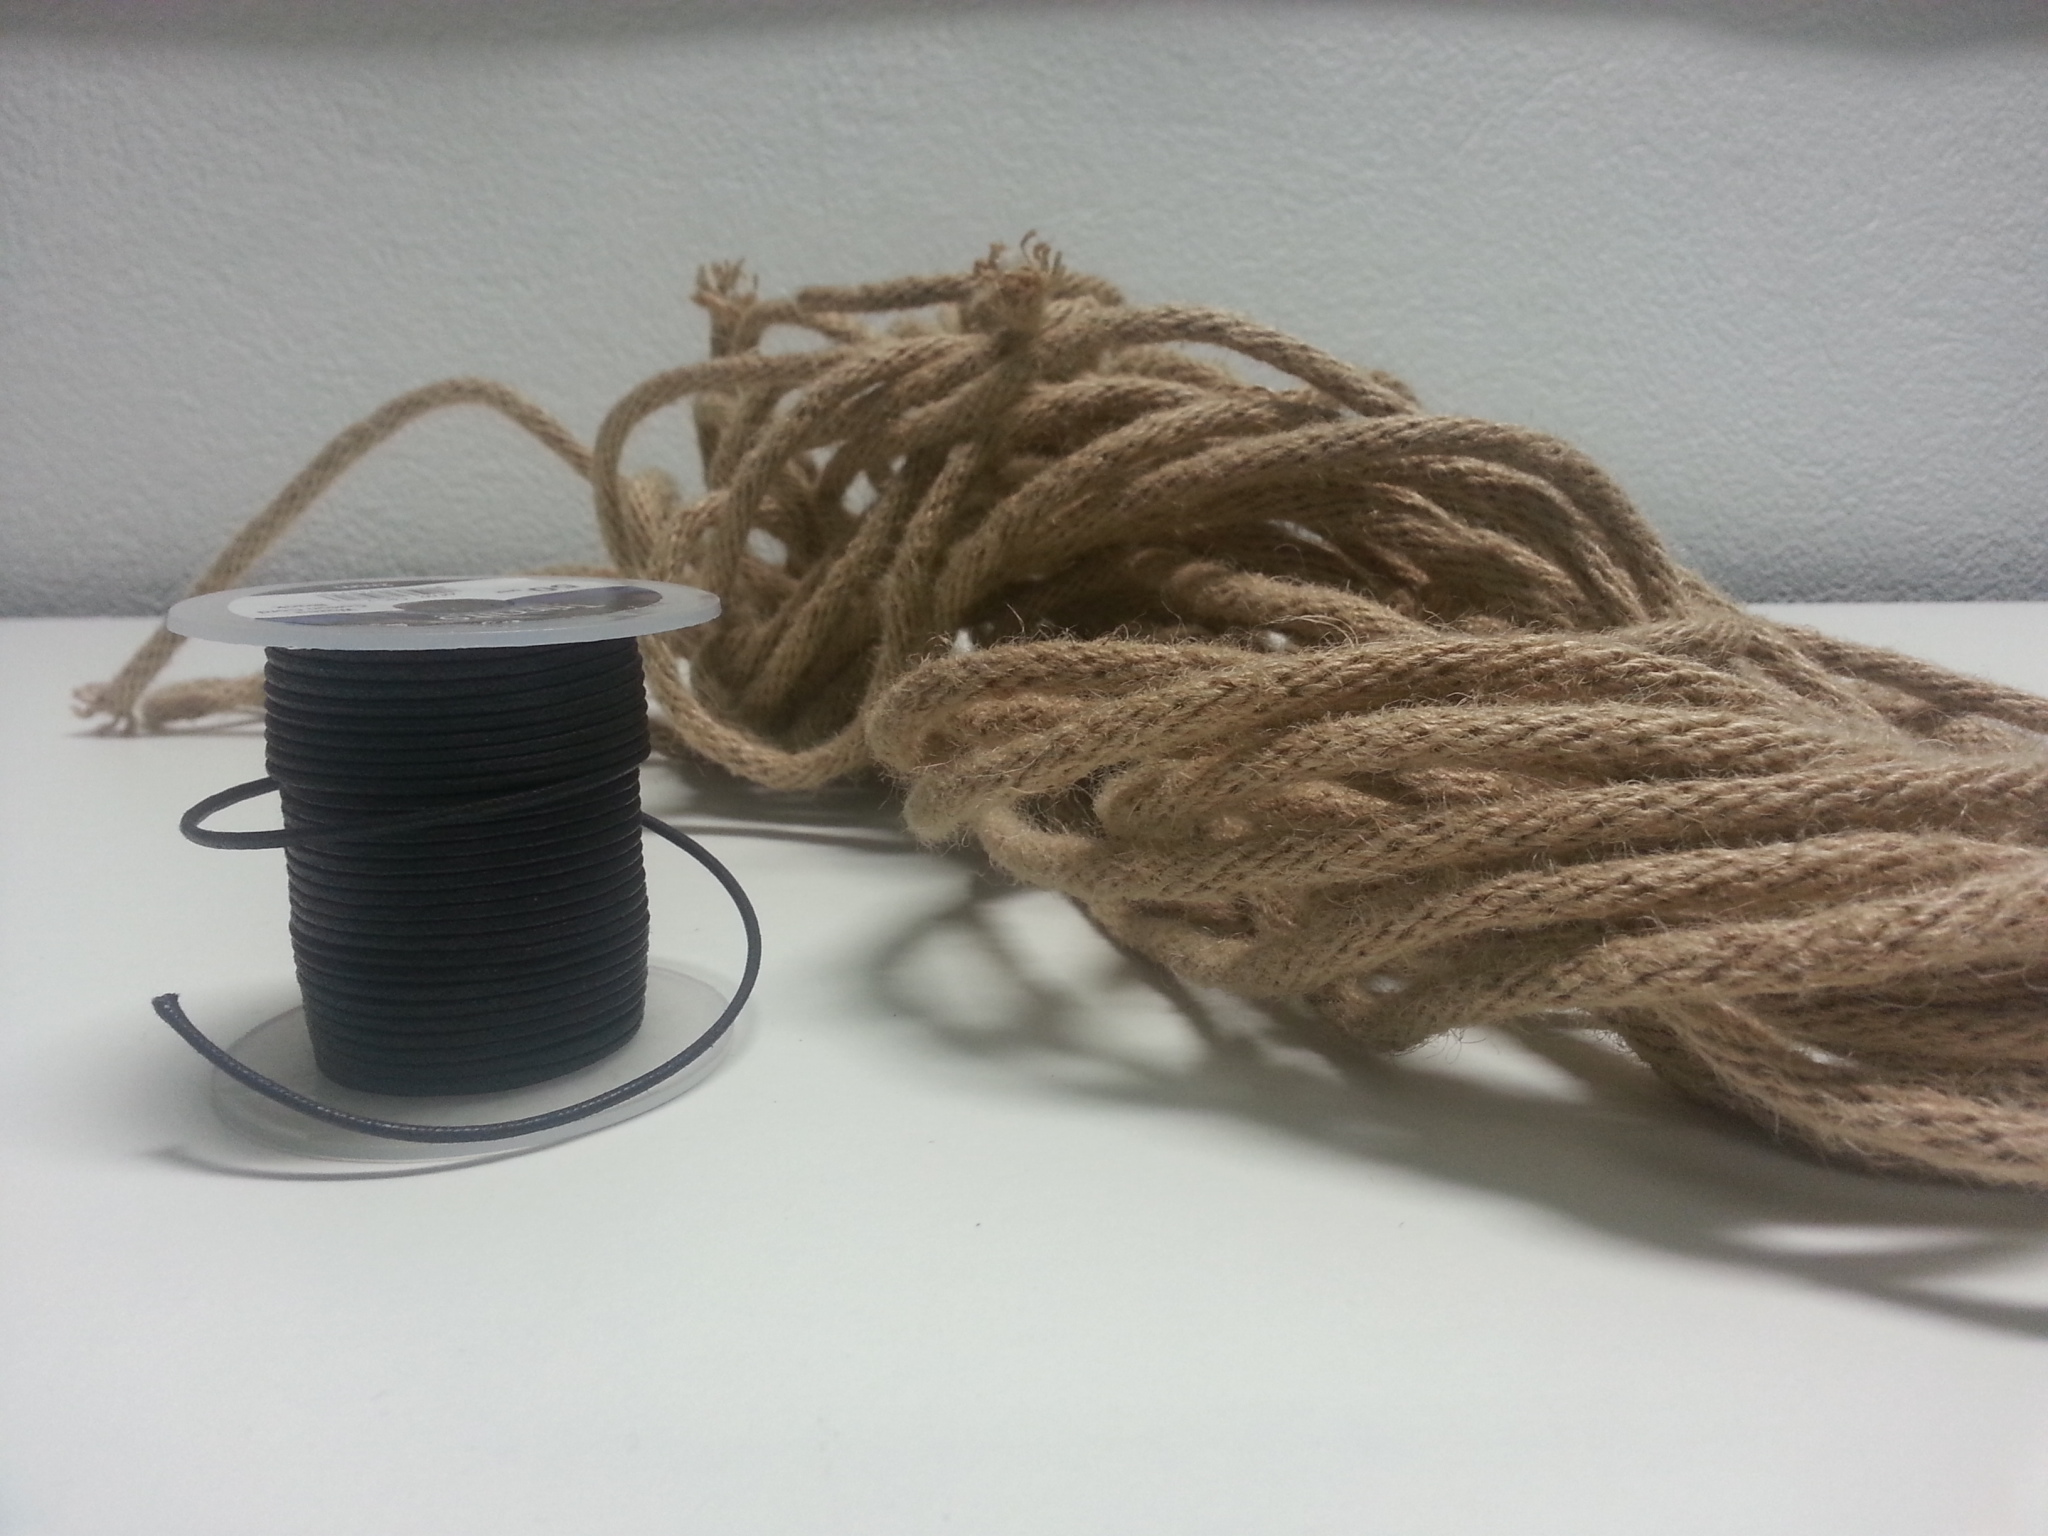 Rope and cord